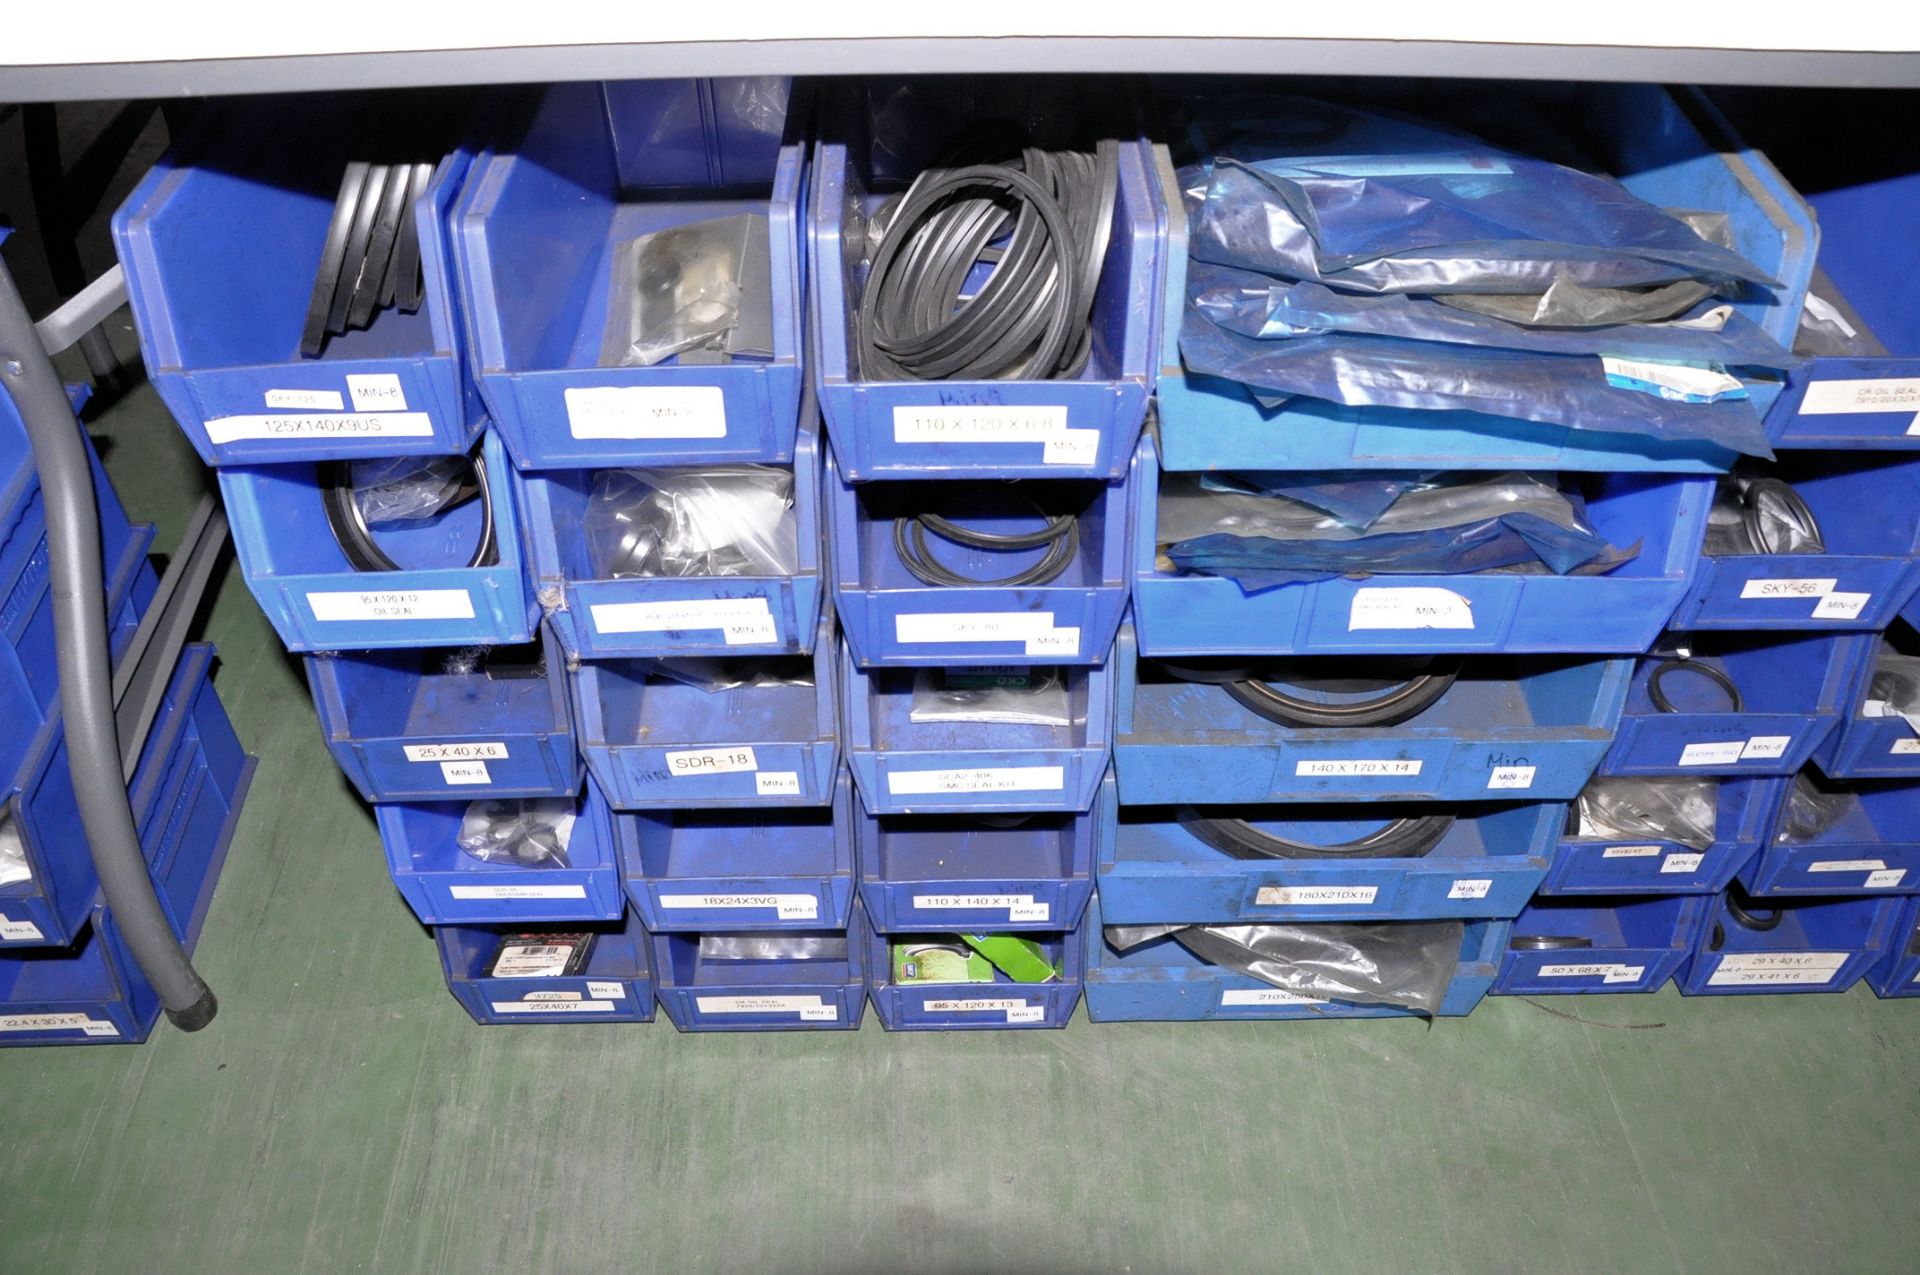 Lot-Various Bearing Seals in Blue Parts Bins on Floor Under (3) Tables, (E-3) - Image 4 of 6